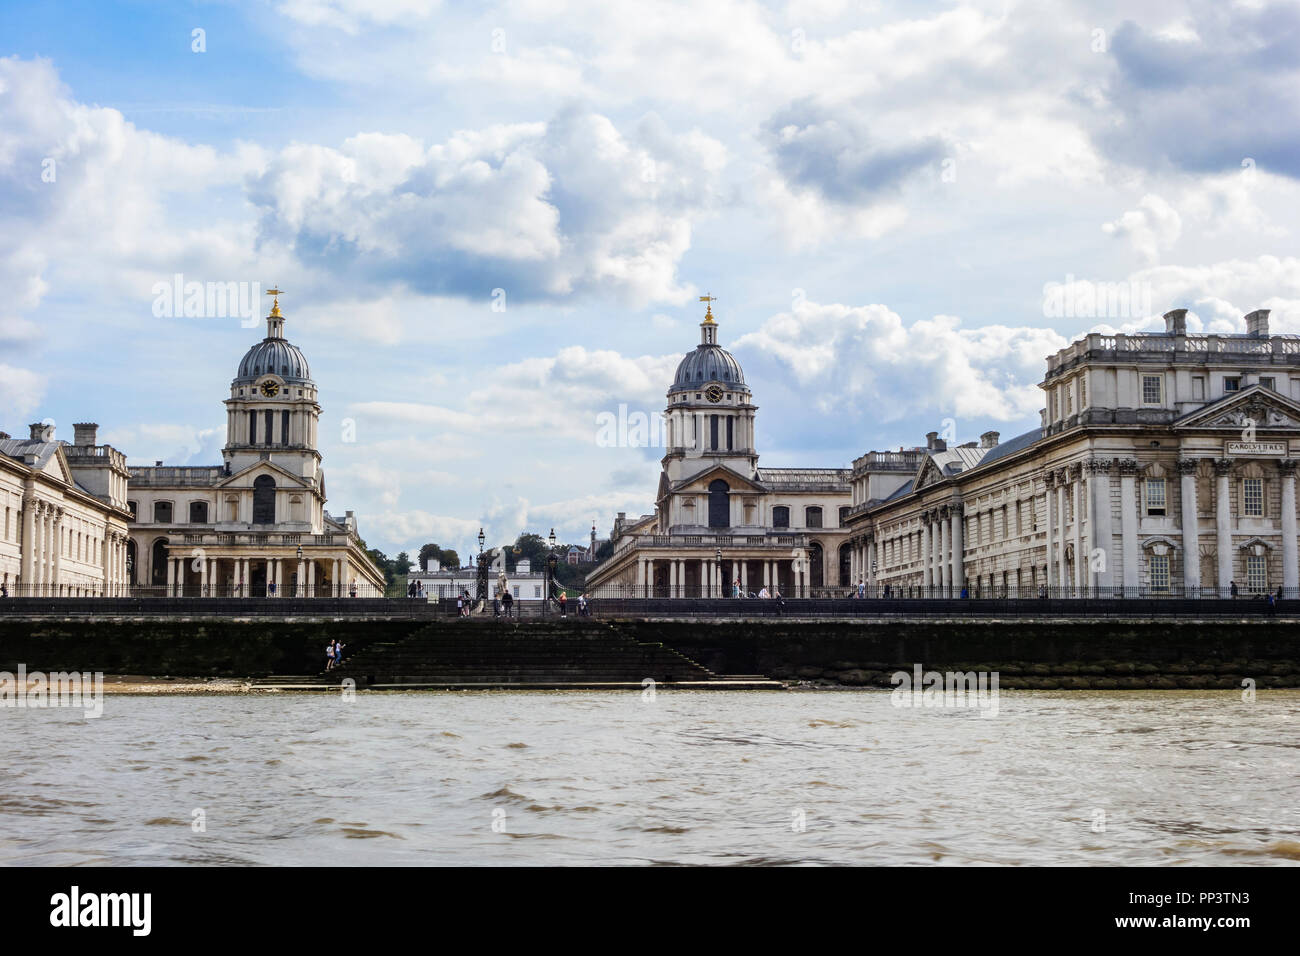 View of the embankment of Greenwich and Old Royal Naval College. Greenwich peninsula in South East London, England. Maritime Museum. Stock Photo